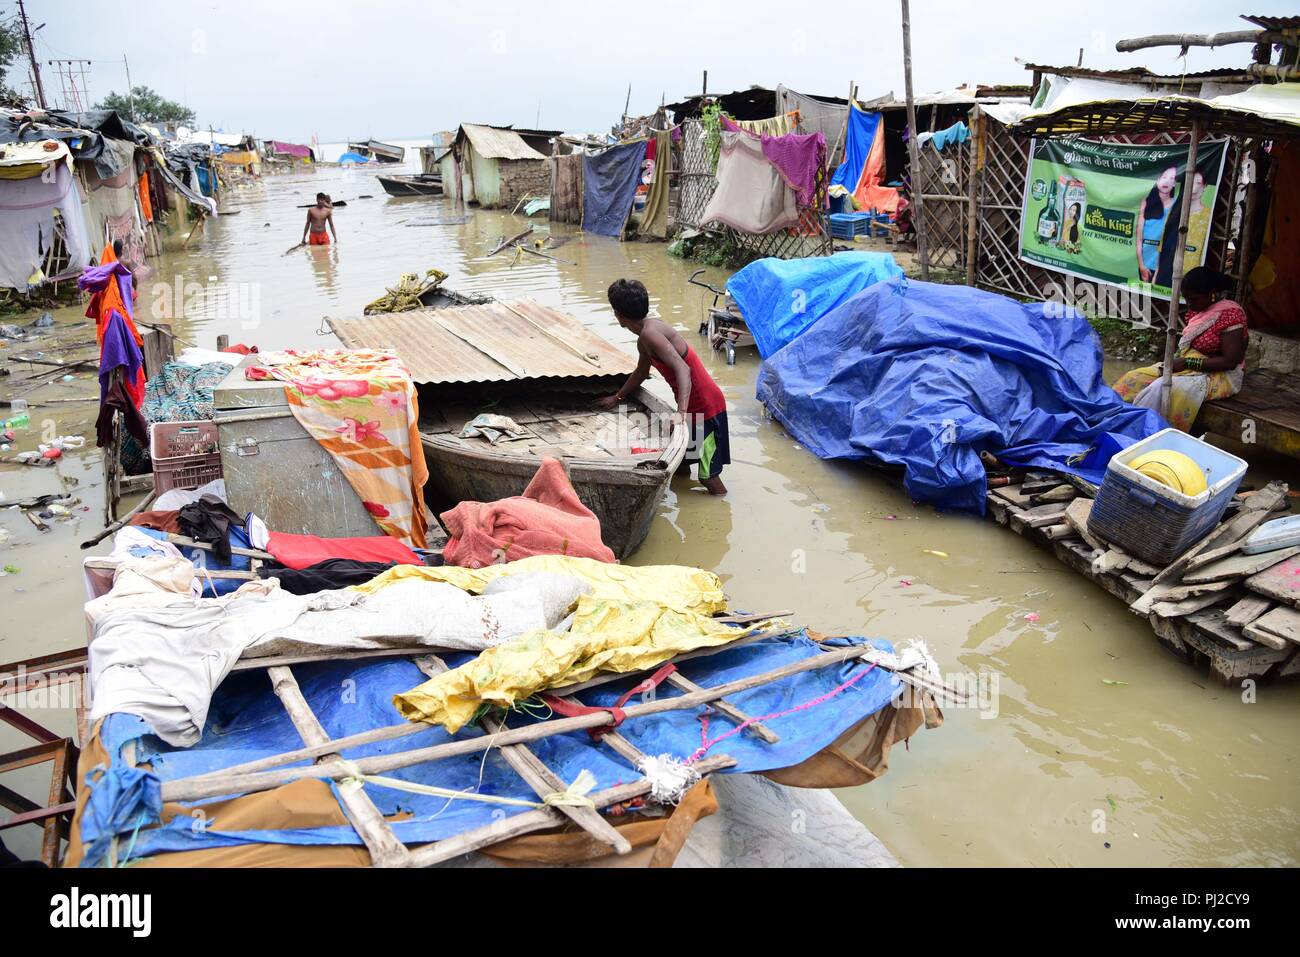 Allahabad, Uttar Pradesh, India. 4th Sep, 2018. Allahabad: People shift their belongings to a safe place after their houses submerged with flooded water of river Ganga at lowlying area in Allahabad on 04-09-2018. Credit: Prabhat Kumar Verma/ZUMA Wire/Alamy Live News Stock Photo